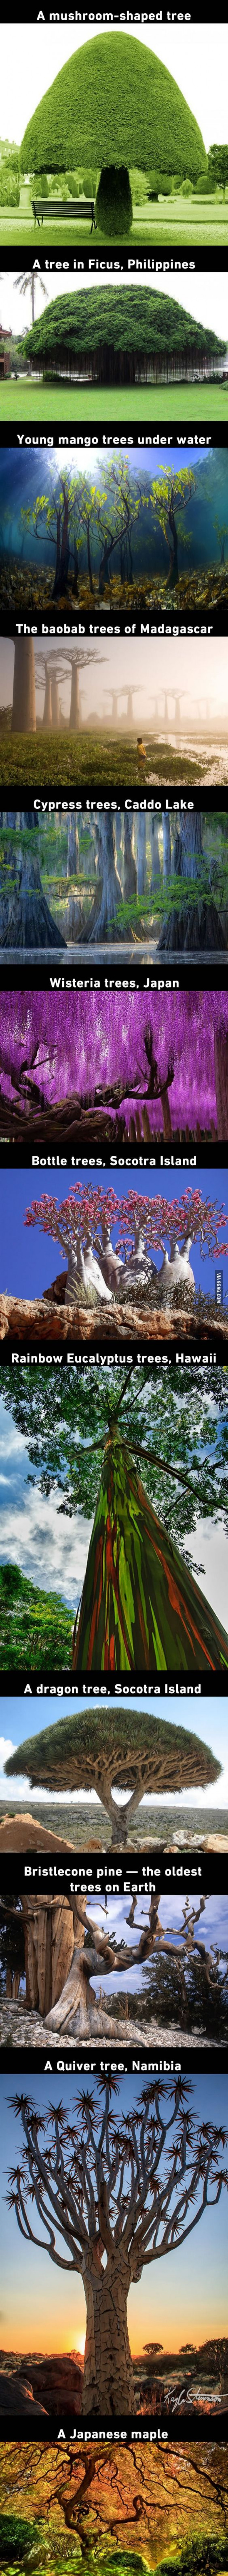 Incredible Trees That Look Like They're Straight Out Of Pandora